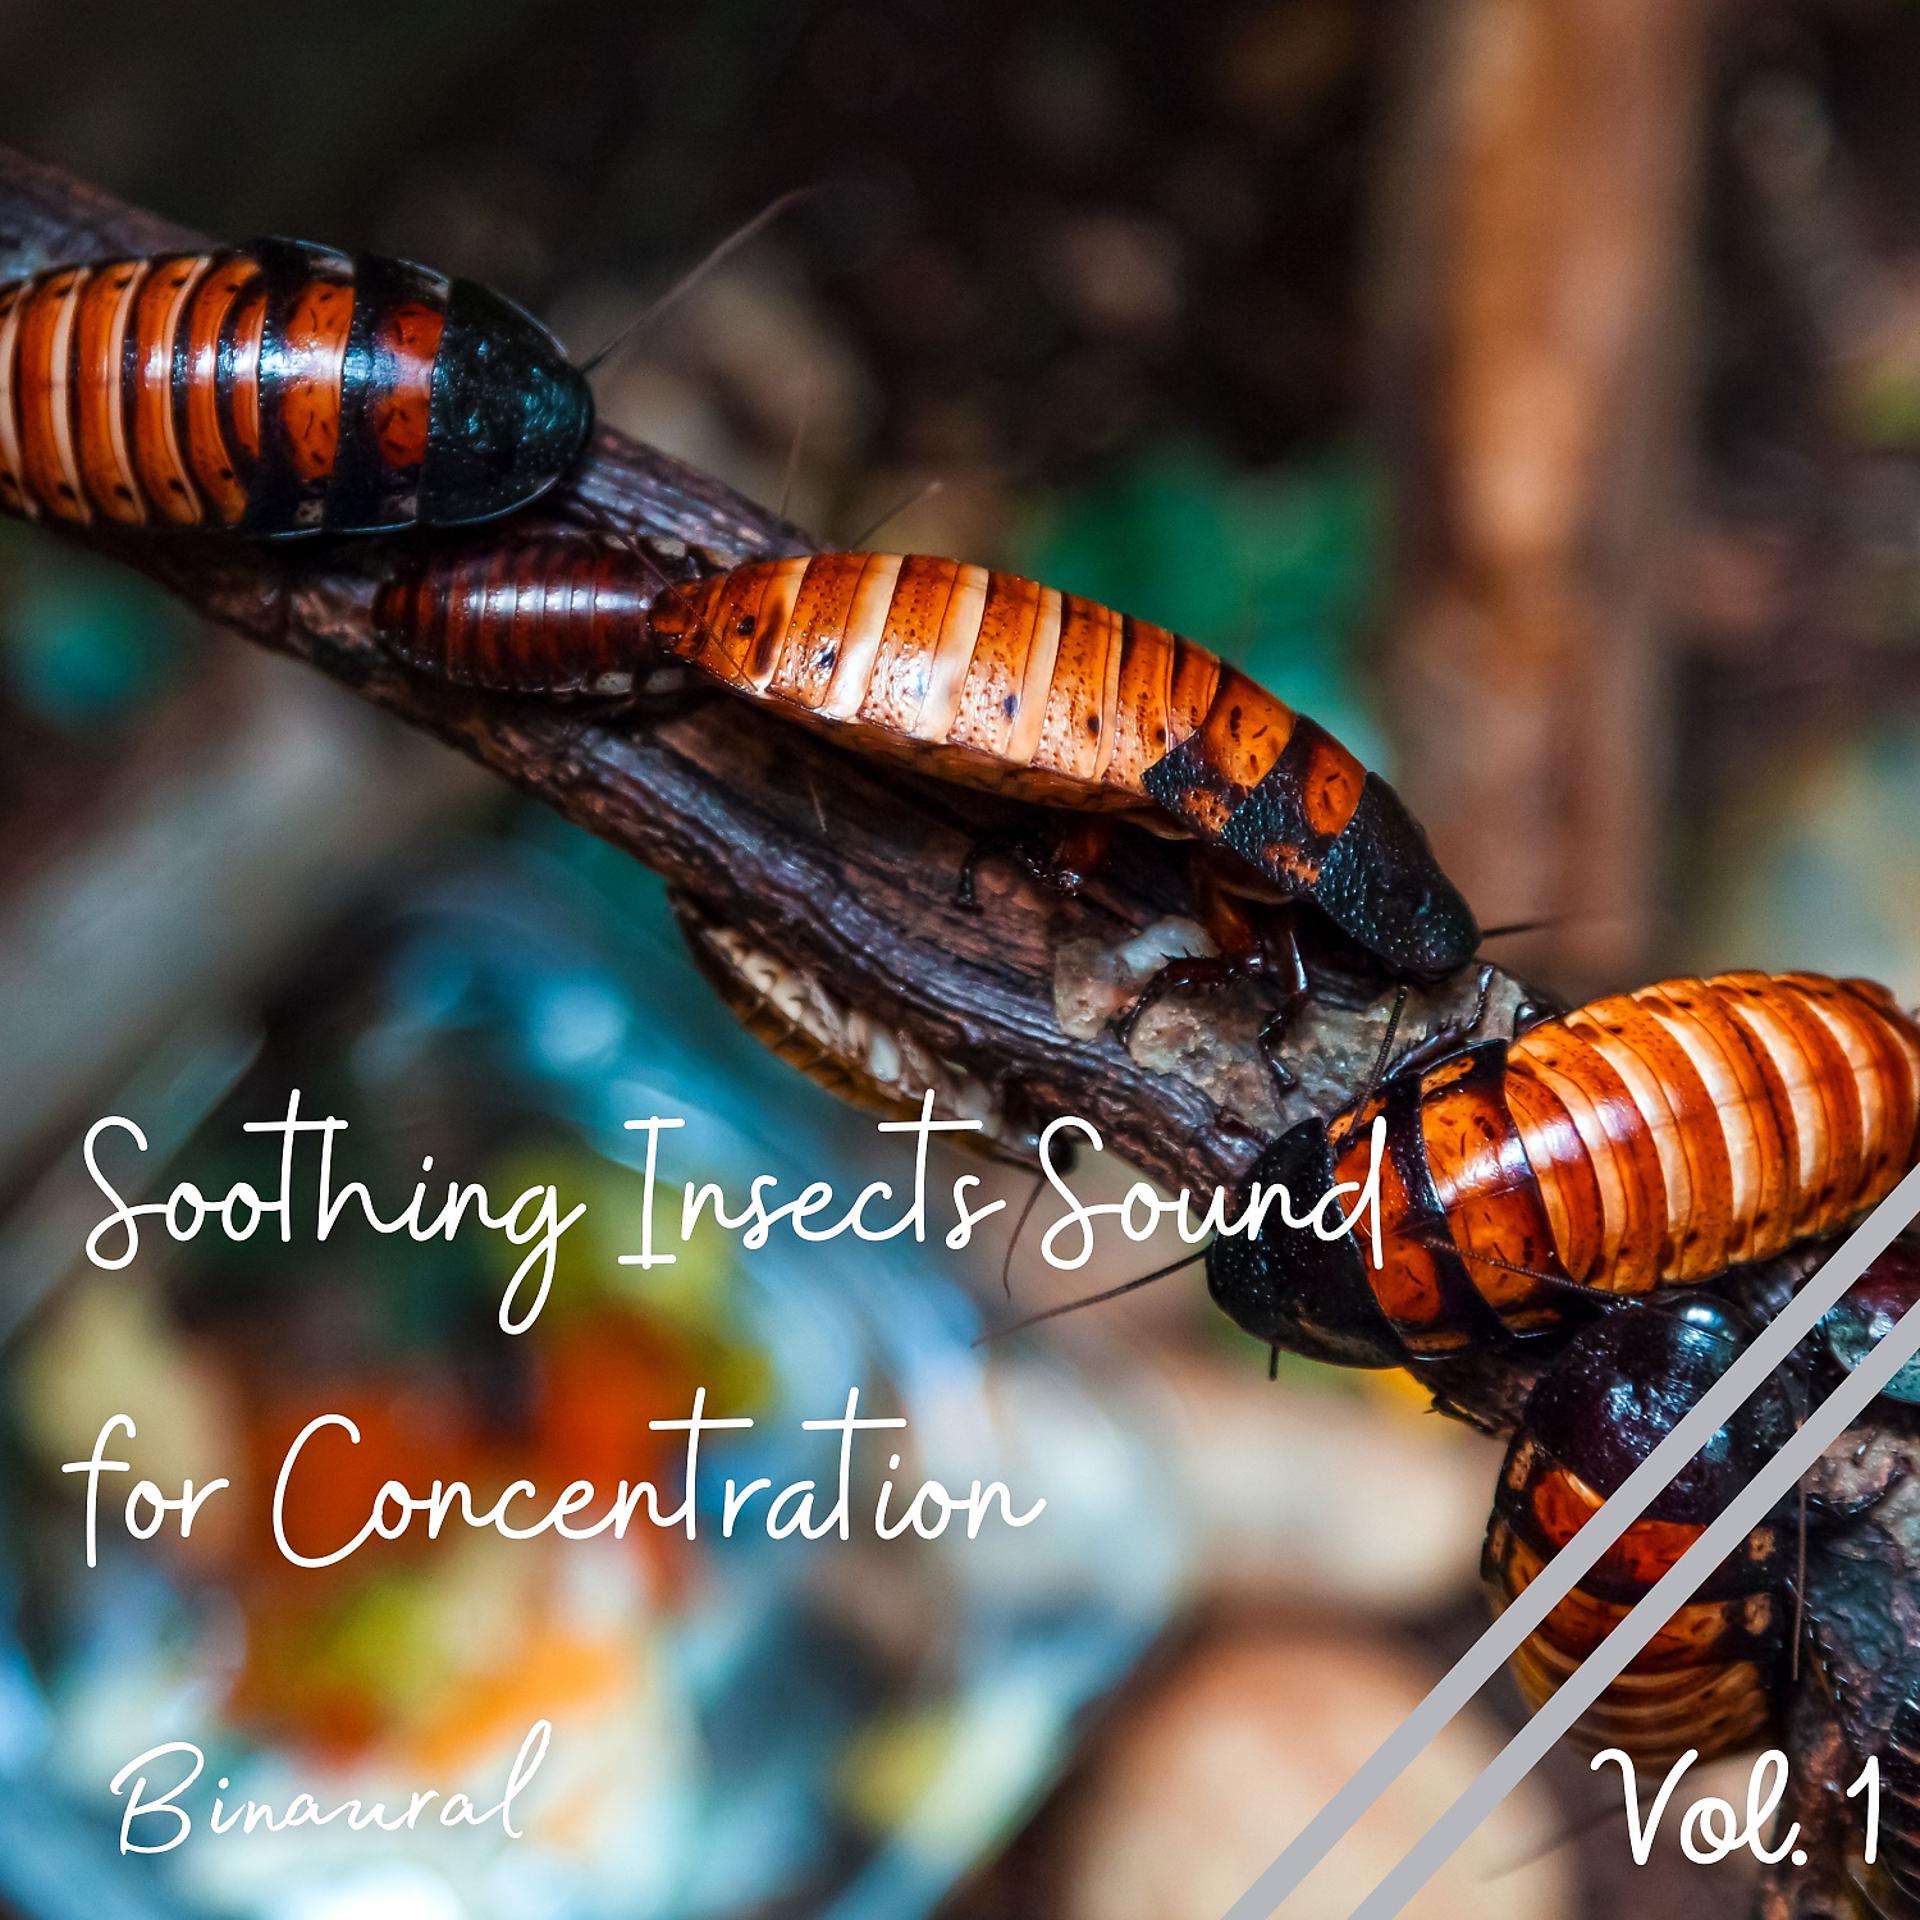 Постер альбома Binaural: Soothing Insects Sound for Concentration Vol. 1